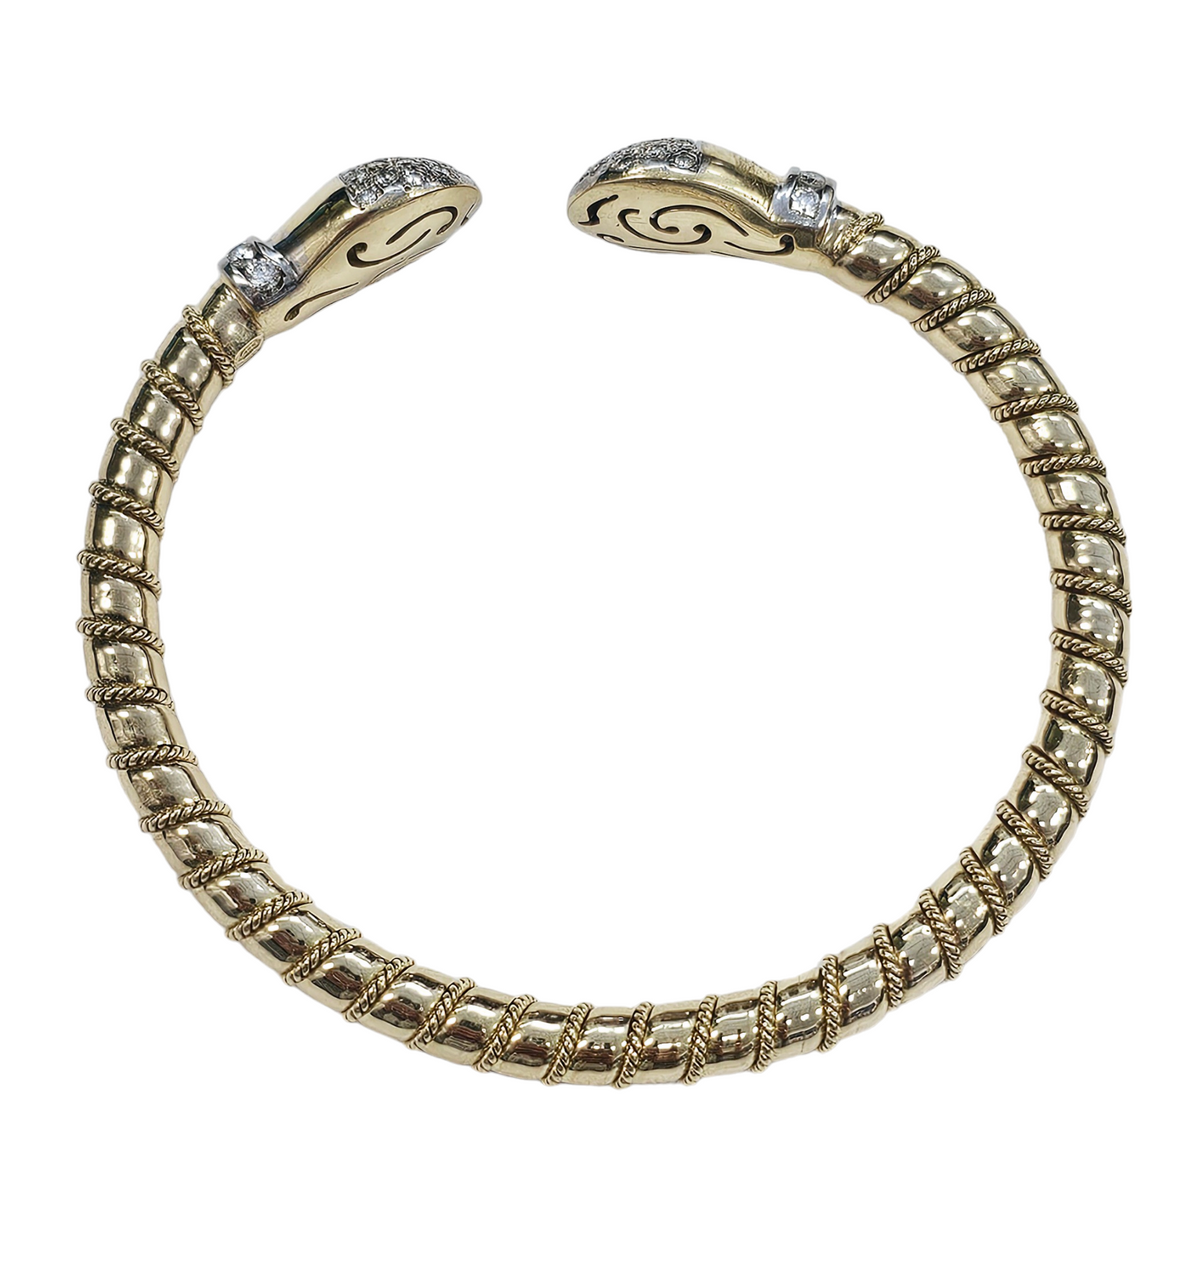 Diamond Open Bangle with Intertwined Rope Design made in 18-karat Yellow Gold